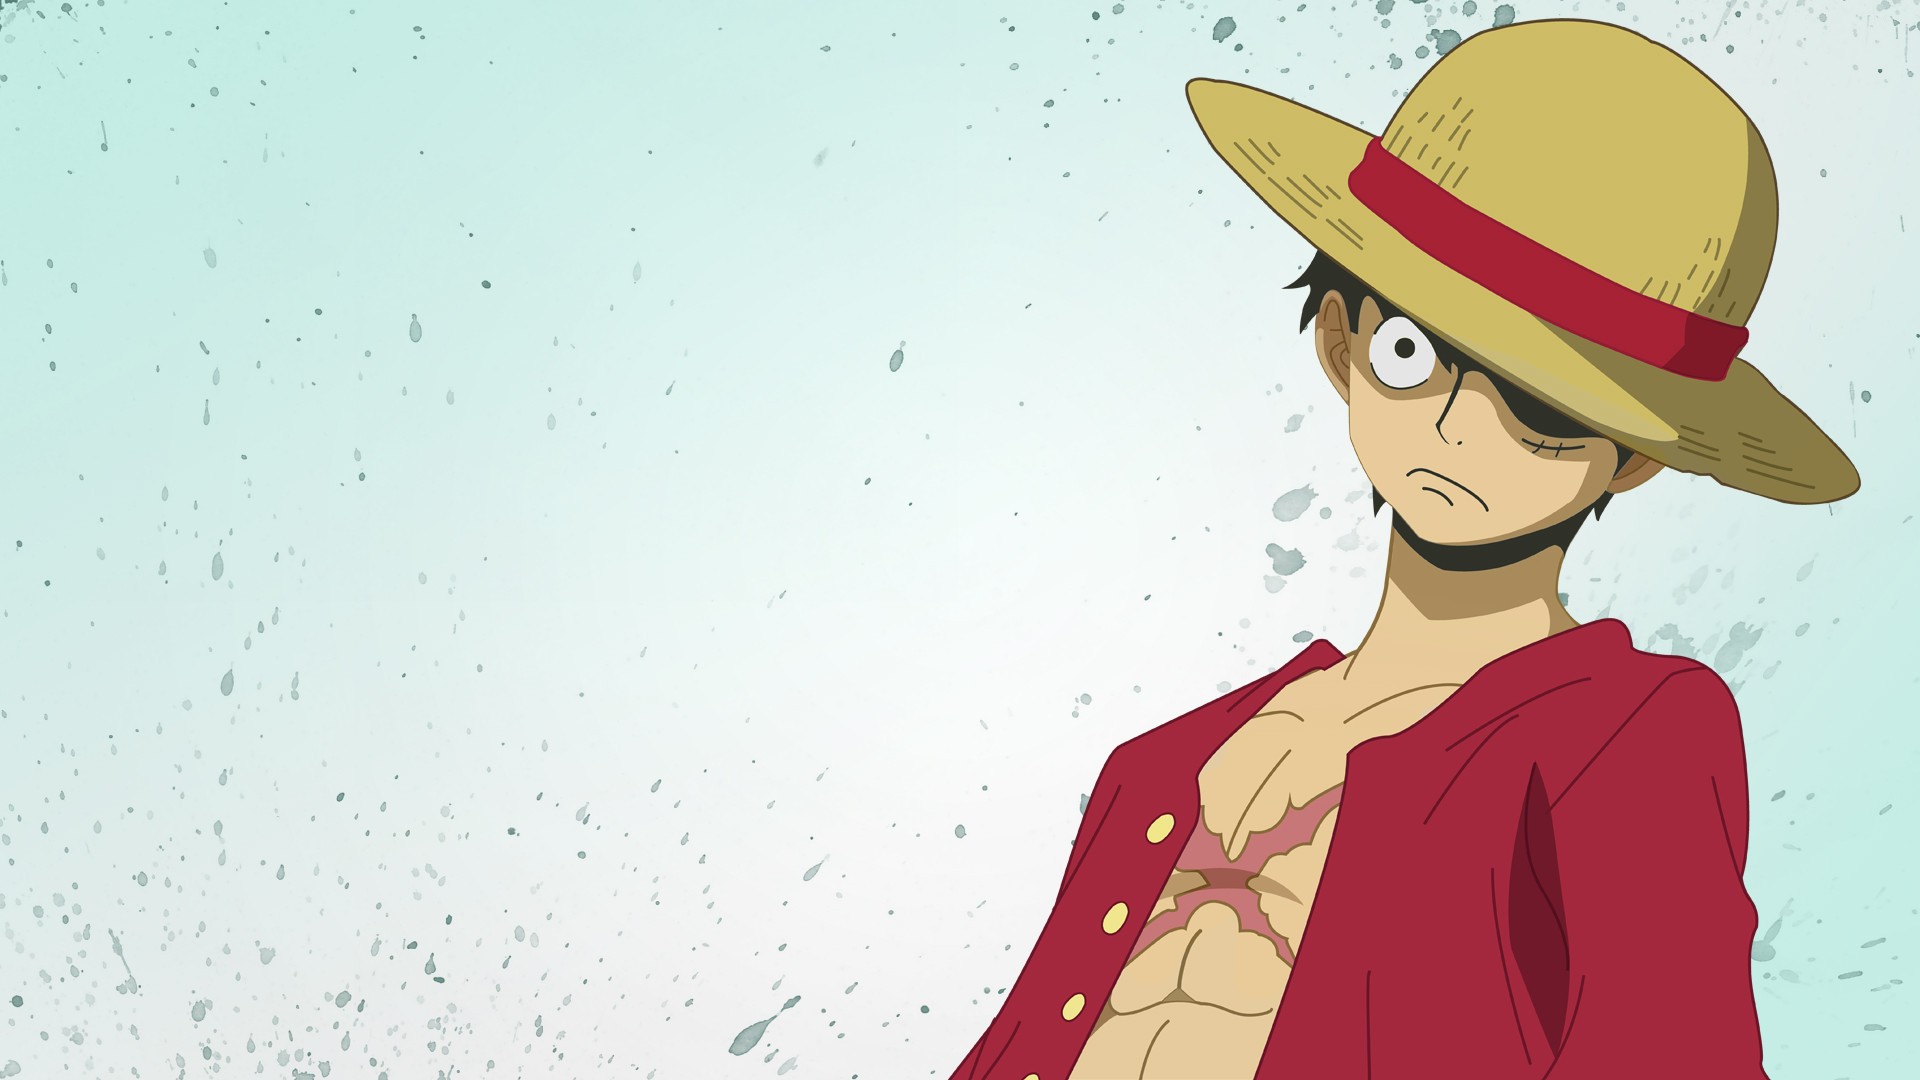 One Piece Luffy Wallpaper submited images 1920x1080